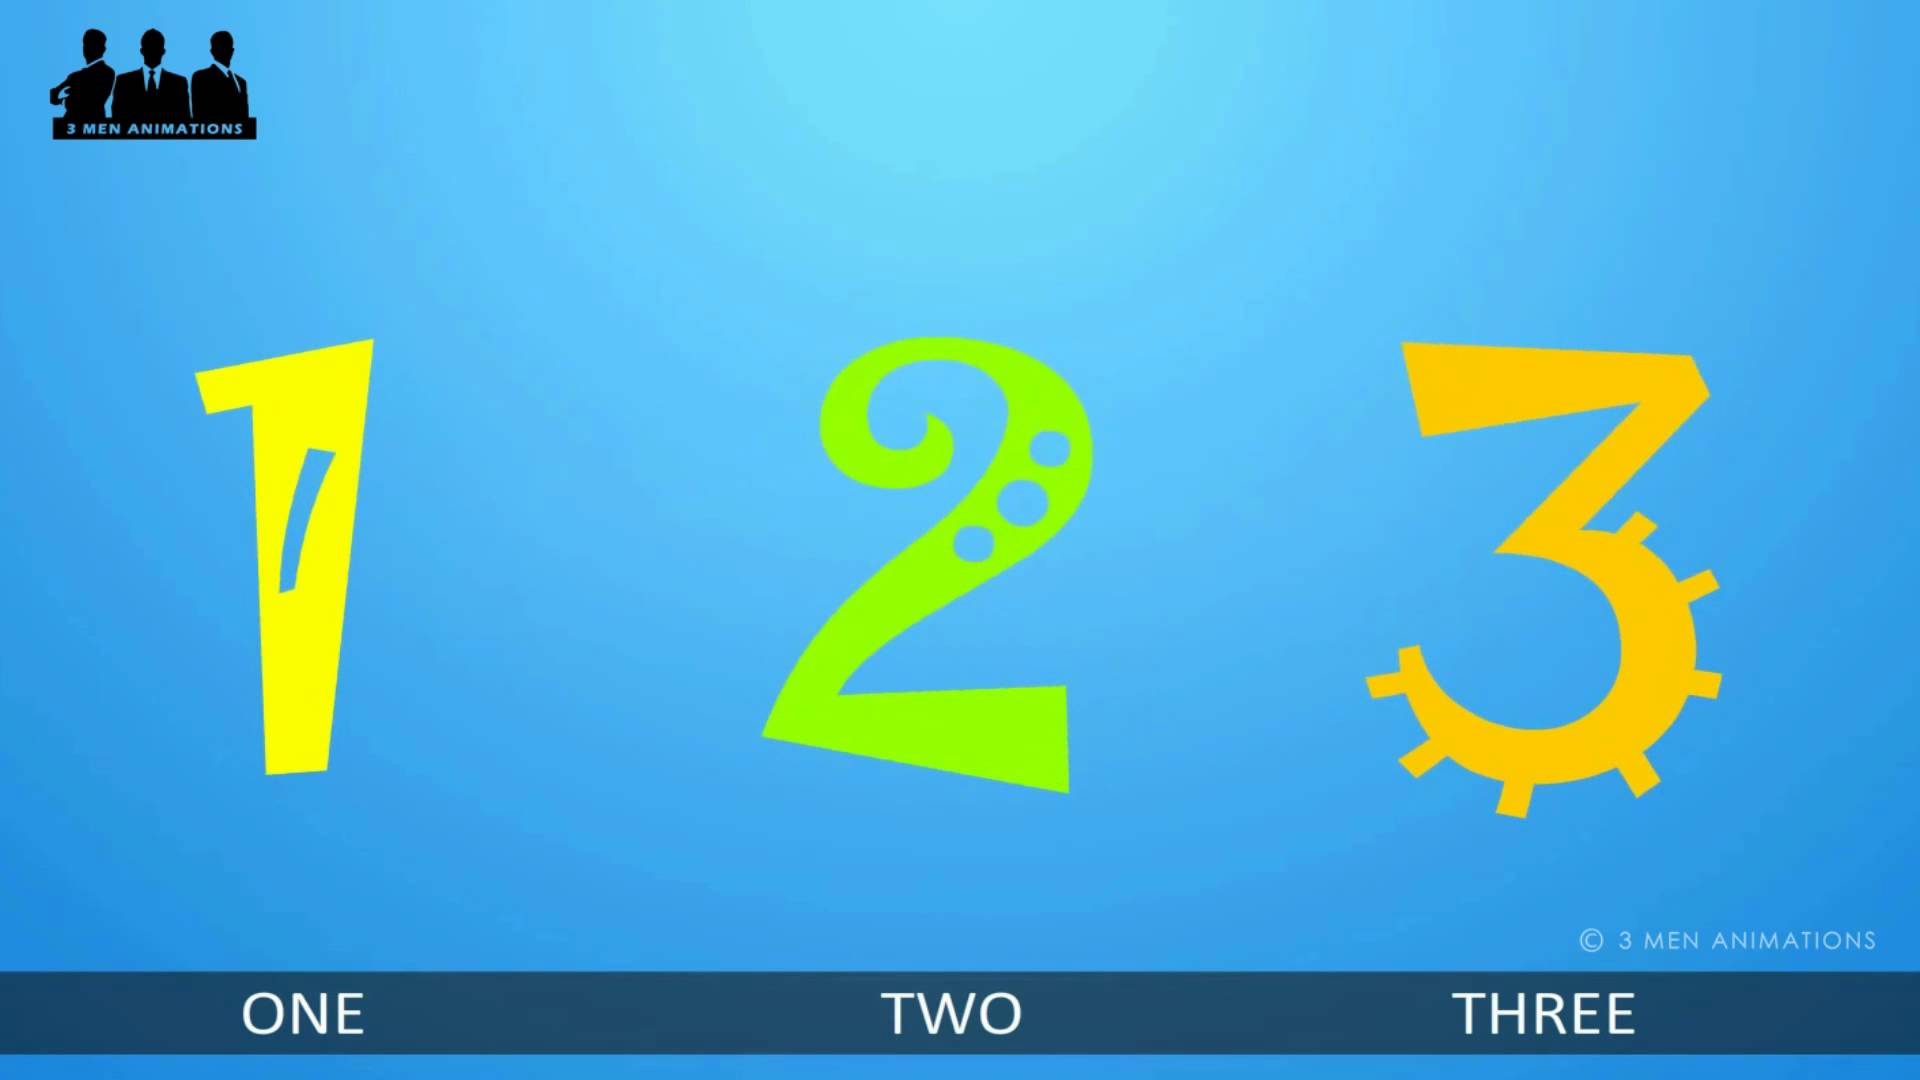 123 NUMBERS SONG "Rhyme" - 3Men Animations - YouTube